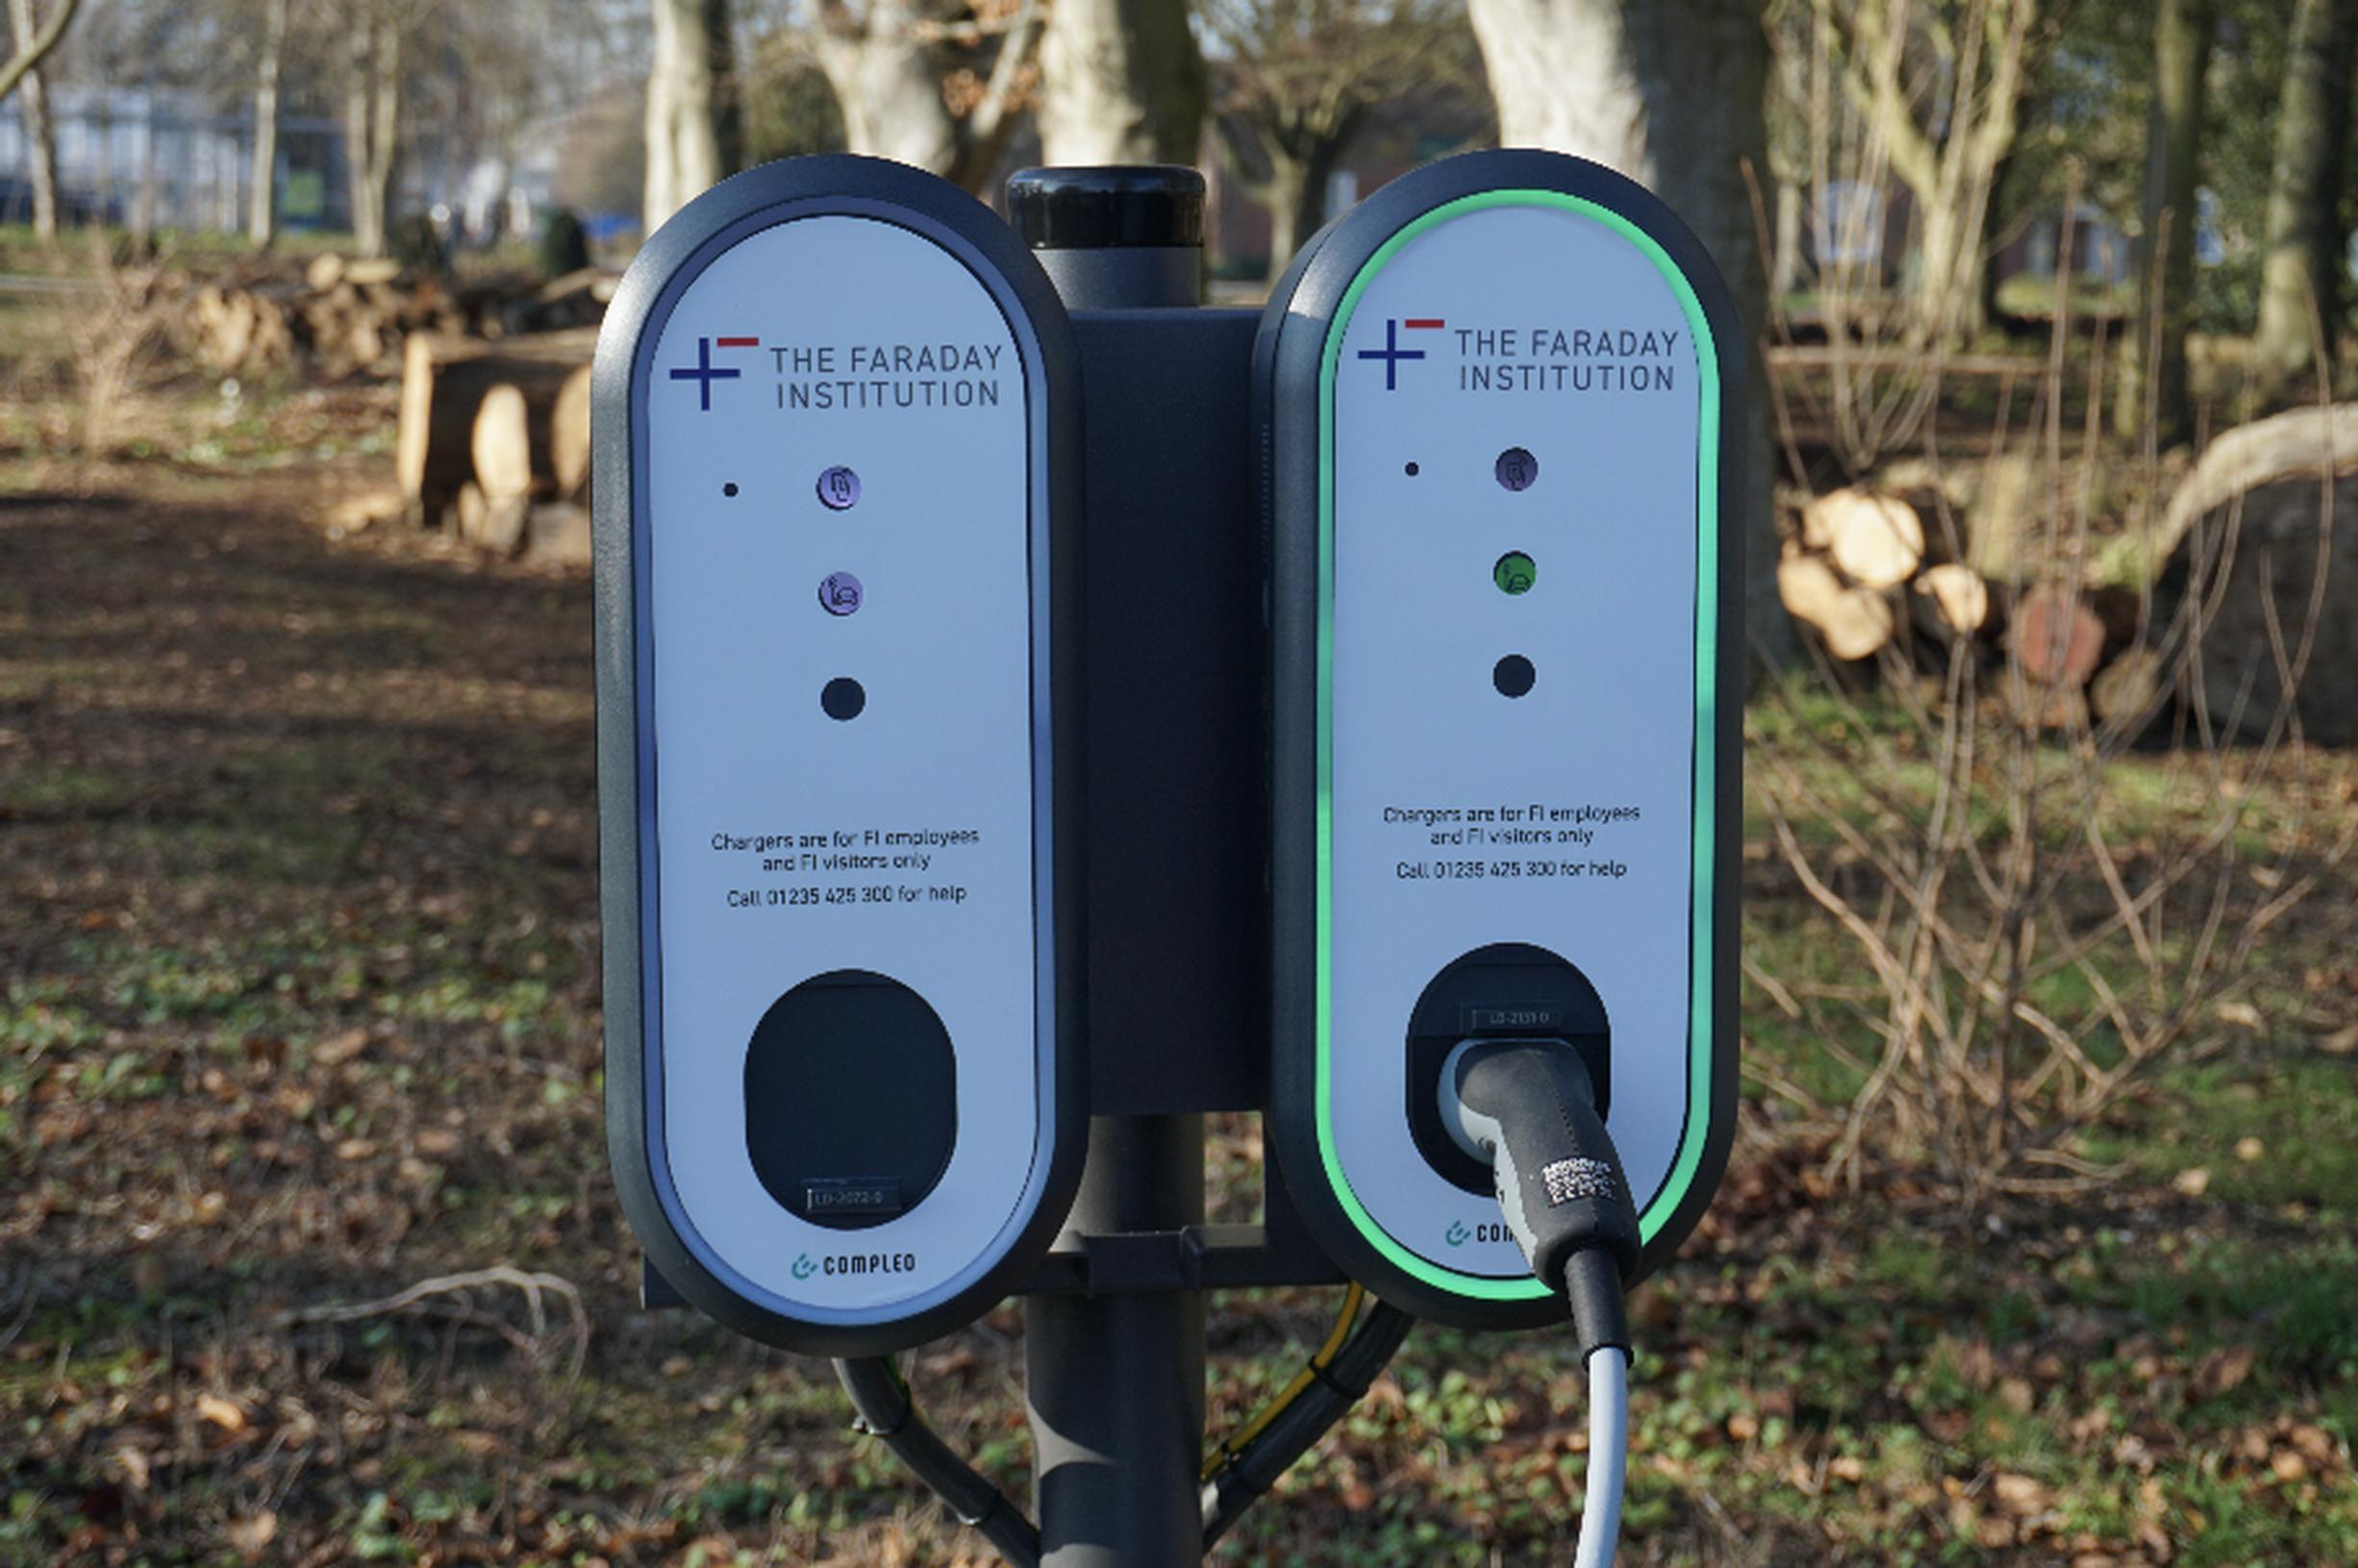 Compleo installs EV chargers at the Faraday Institution